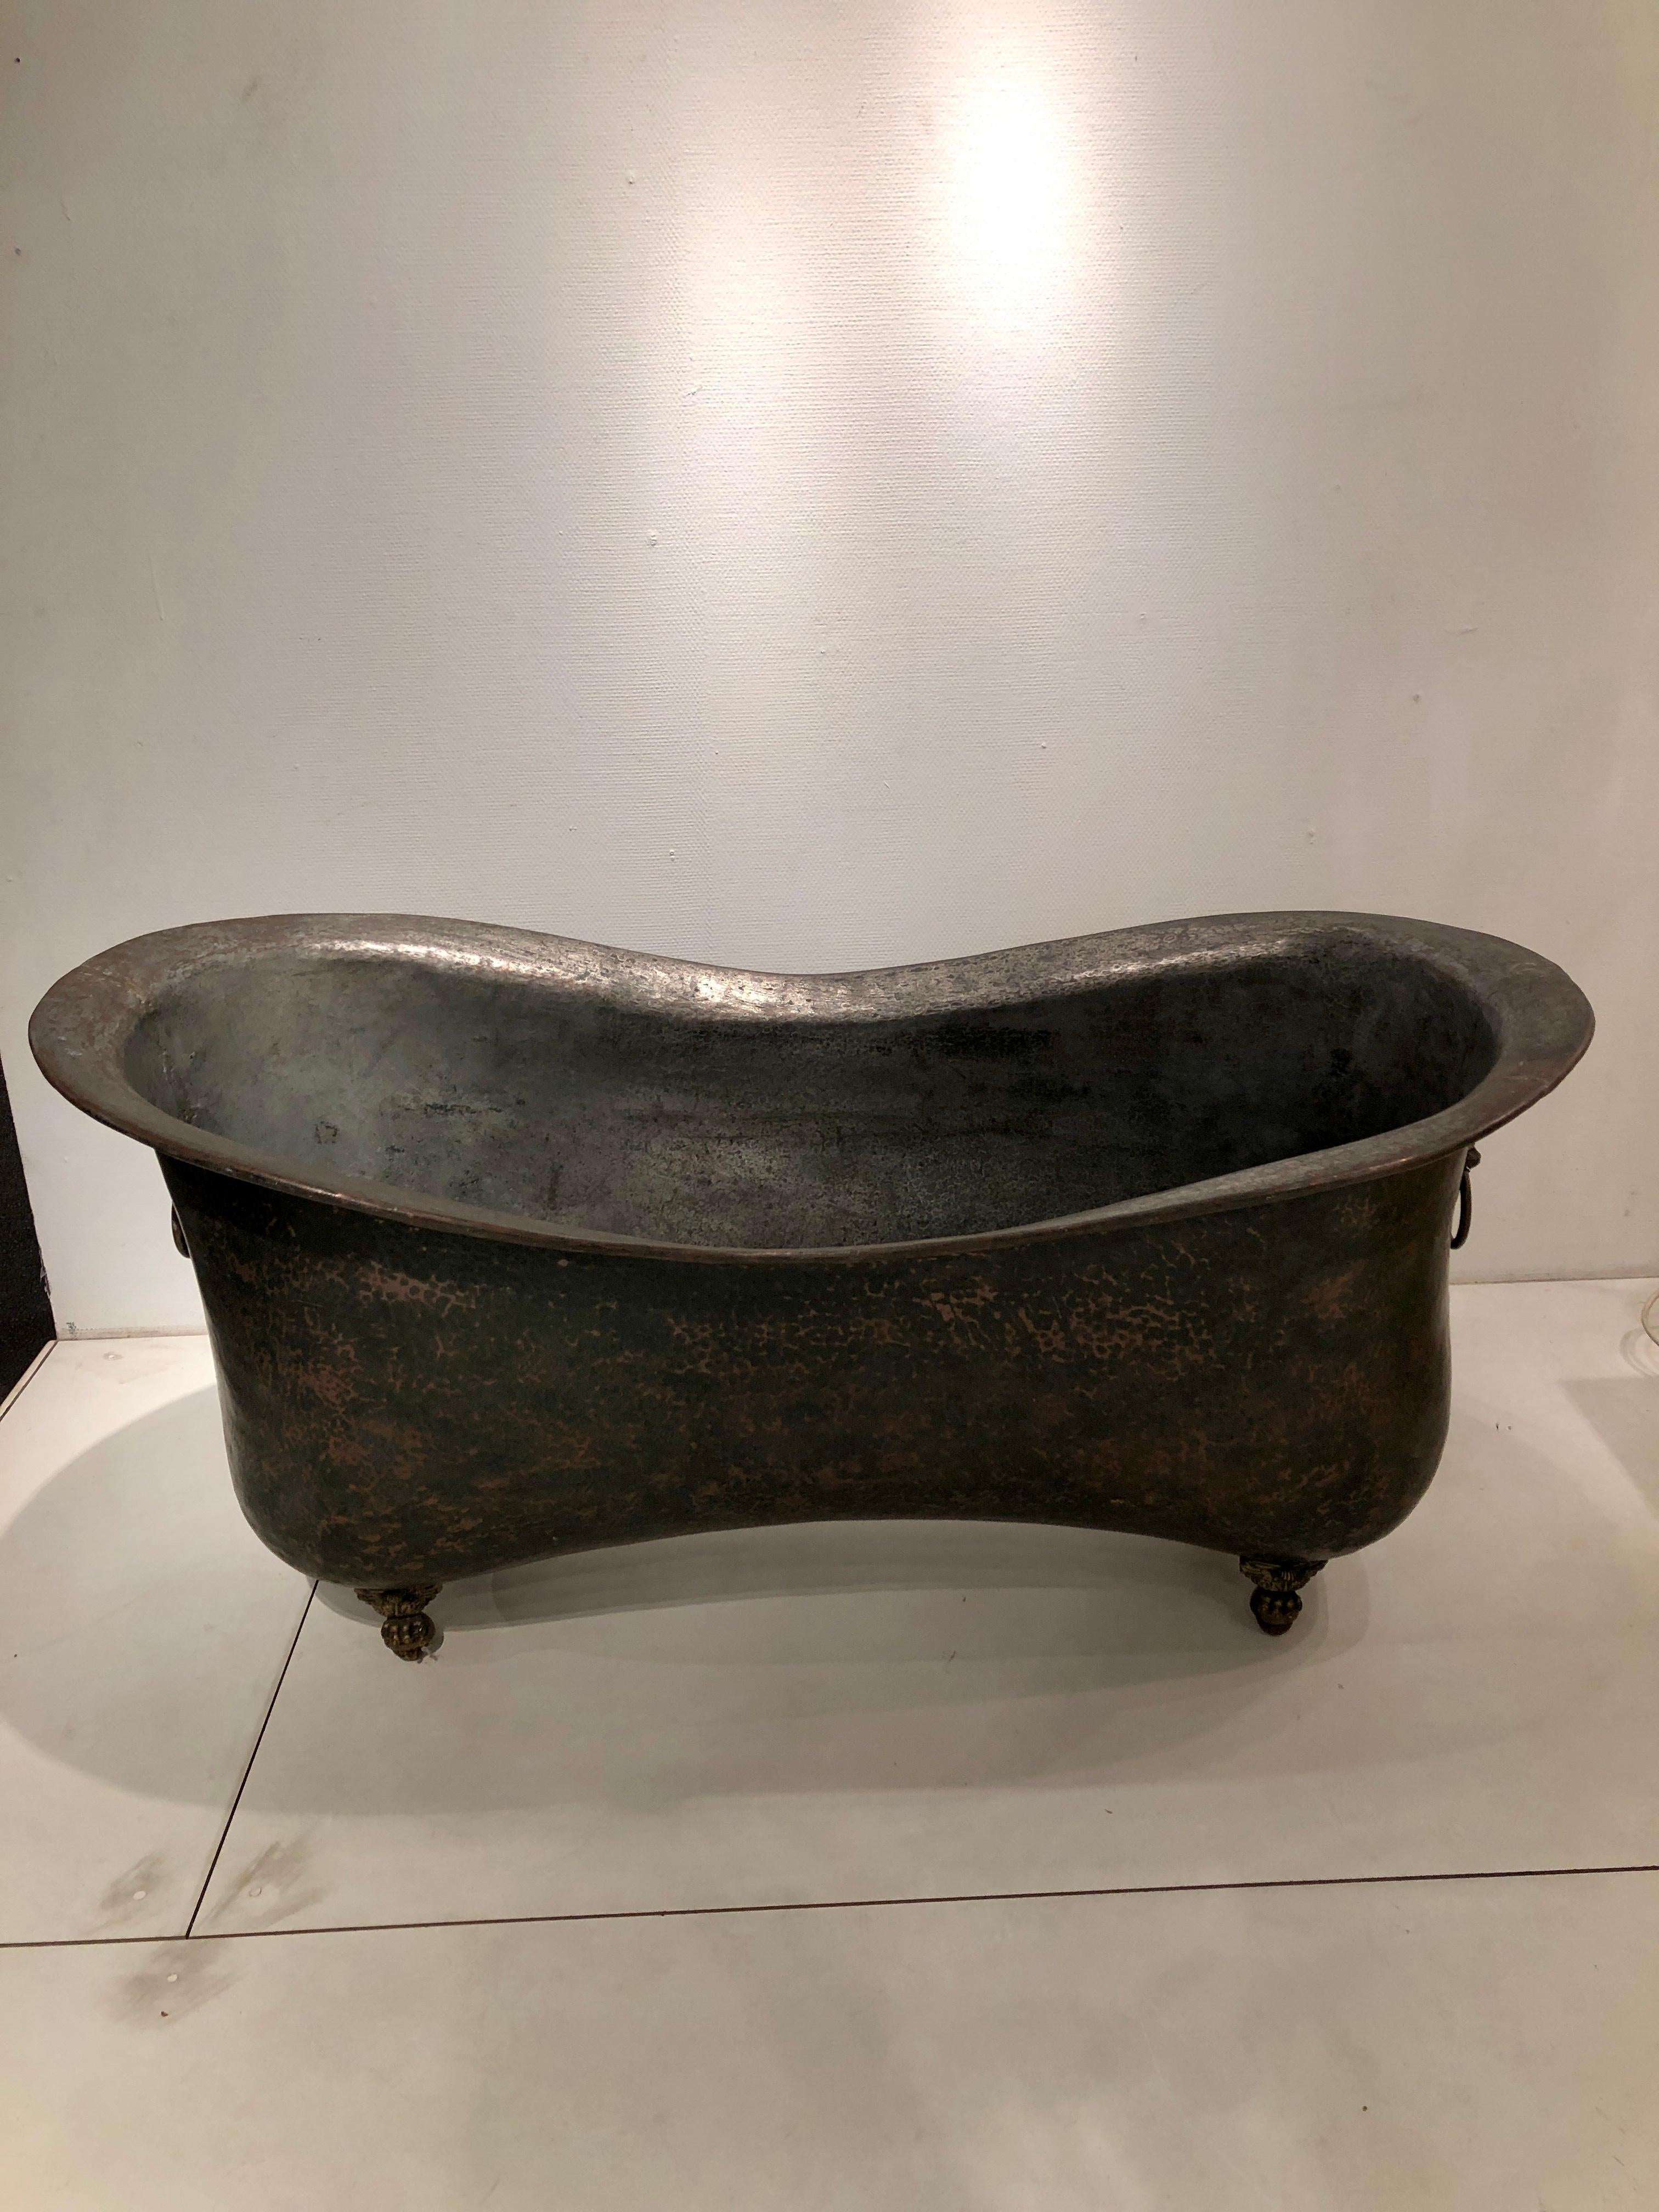 Empire period bathtub in original and very good condition, tinned red copper, claw feet and lion heads, circa 1810. Very rare and never seen before. Extraordinary original conditions.